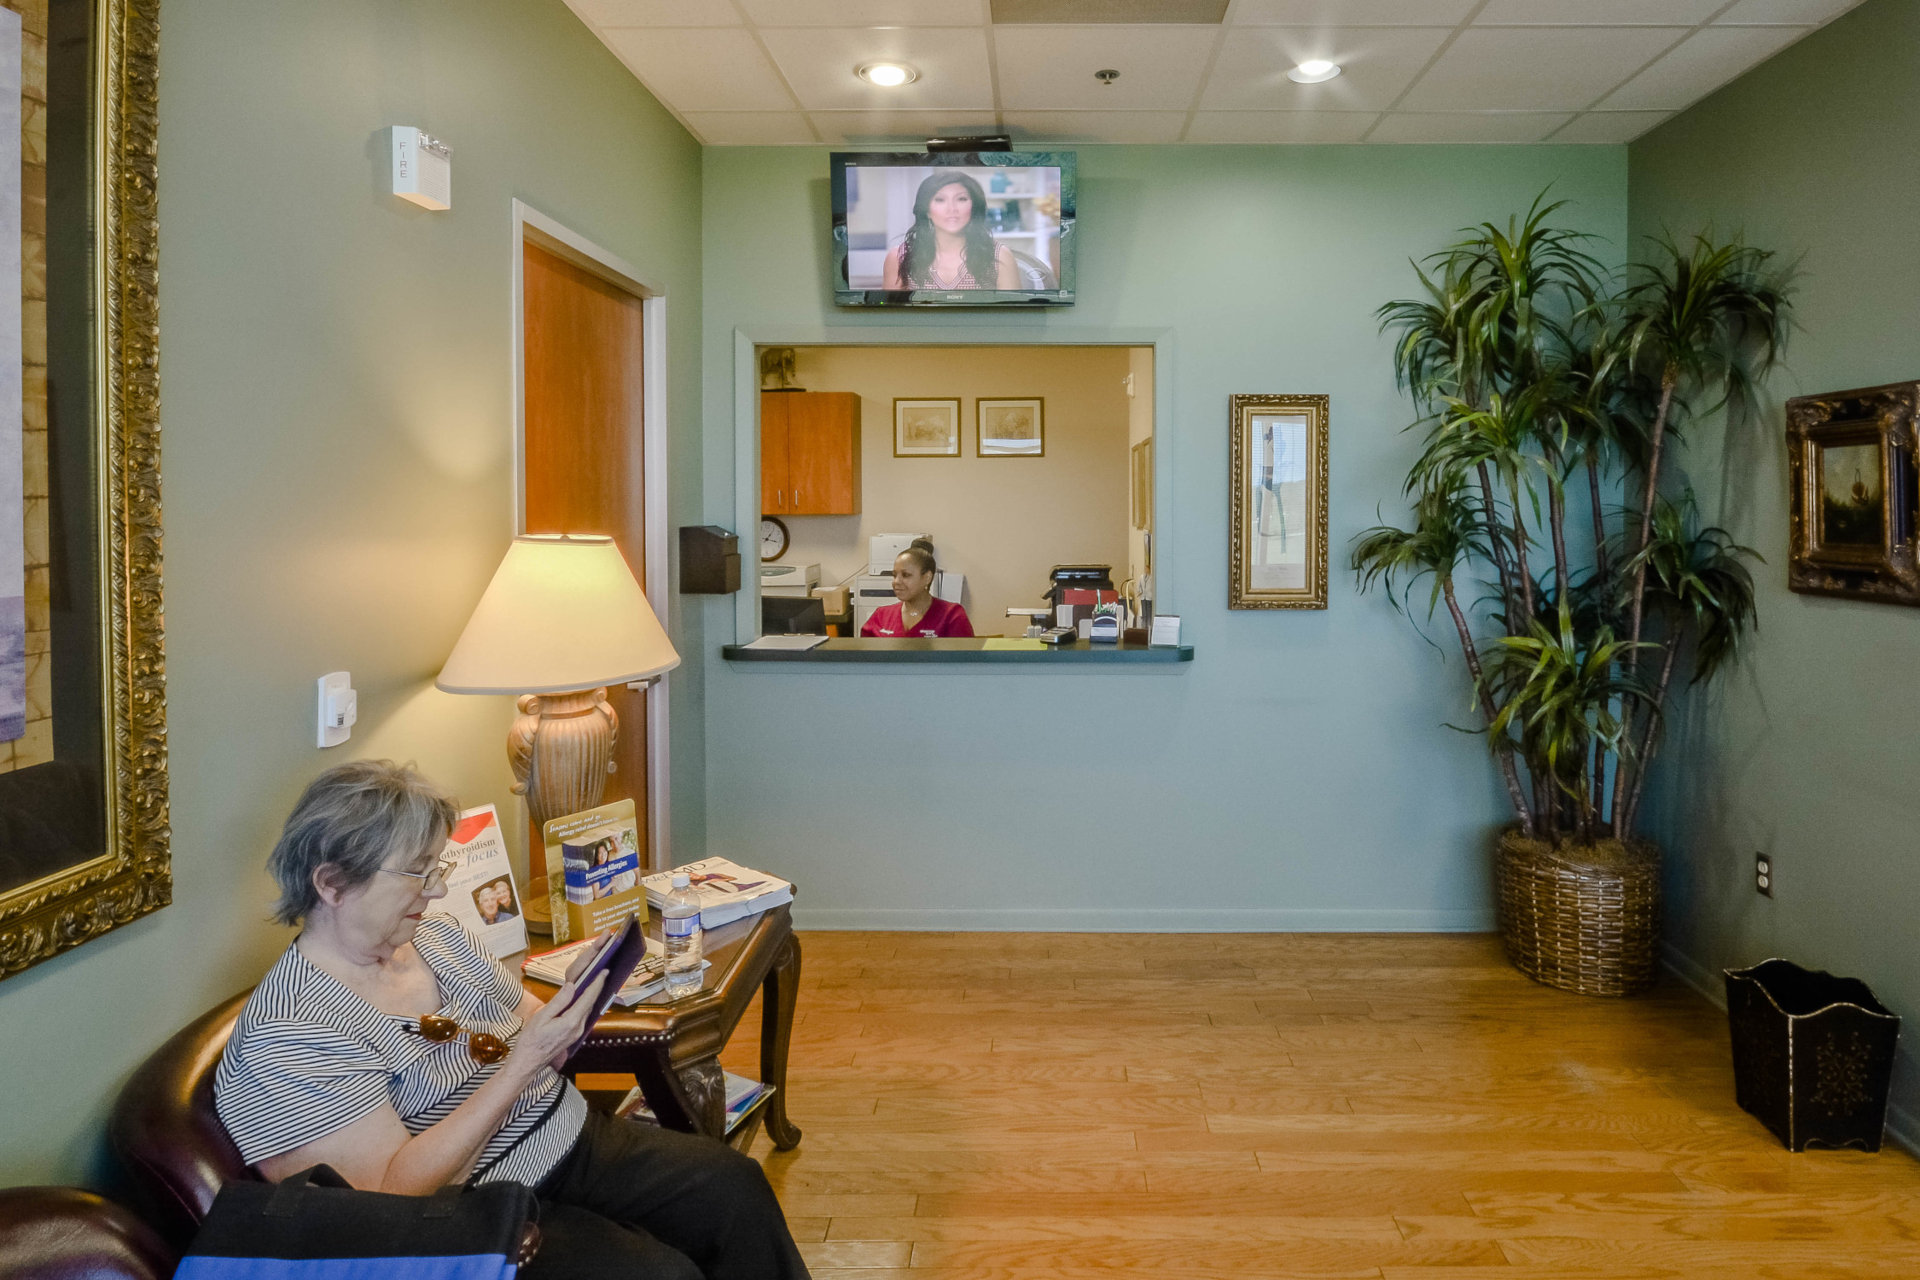 Waiting room at Audible Hearing Centers with woman reading in chair